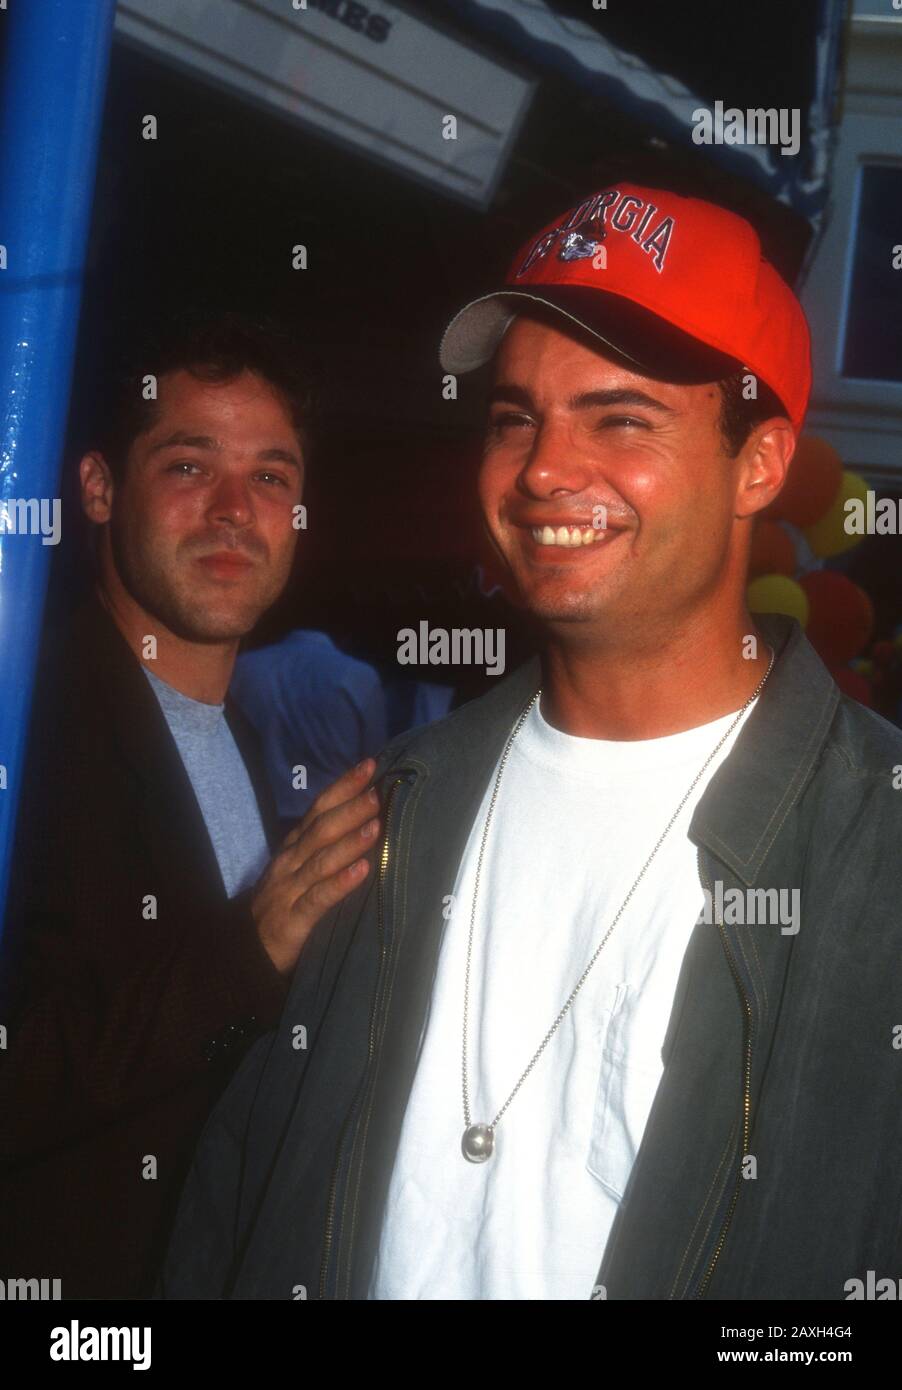 Westwood, California, USa 9th July 1995 Actor David Barry Gray and actor Matt Borlenghi attend Warner Bros. Pictures' 'Free Willy 2: The Adventure Home' Premiere on July 9, 1995 at Mann Village Theatre in Westwood, California, USA. Photo by Barry King/Alamy Stock Photo Stock Photo